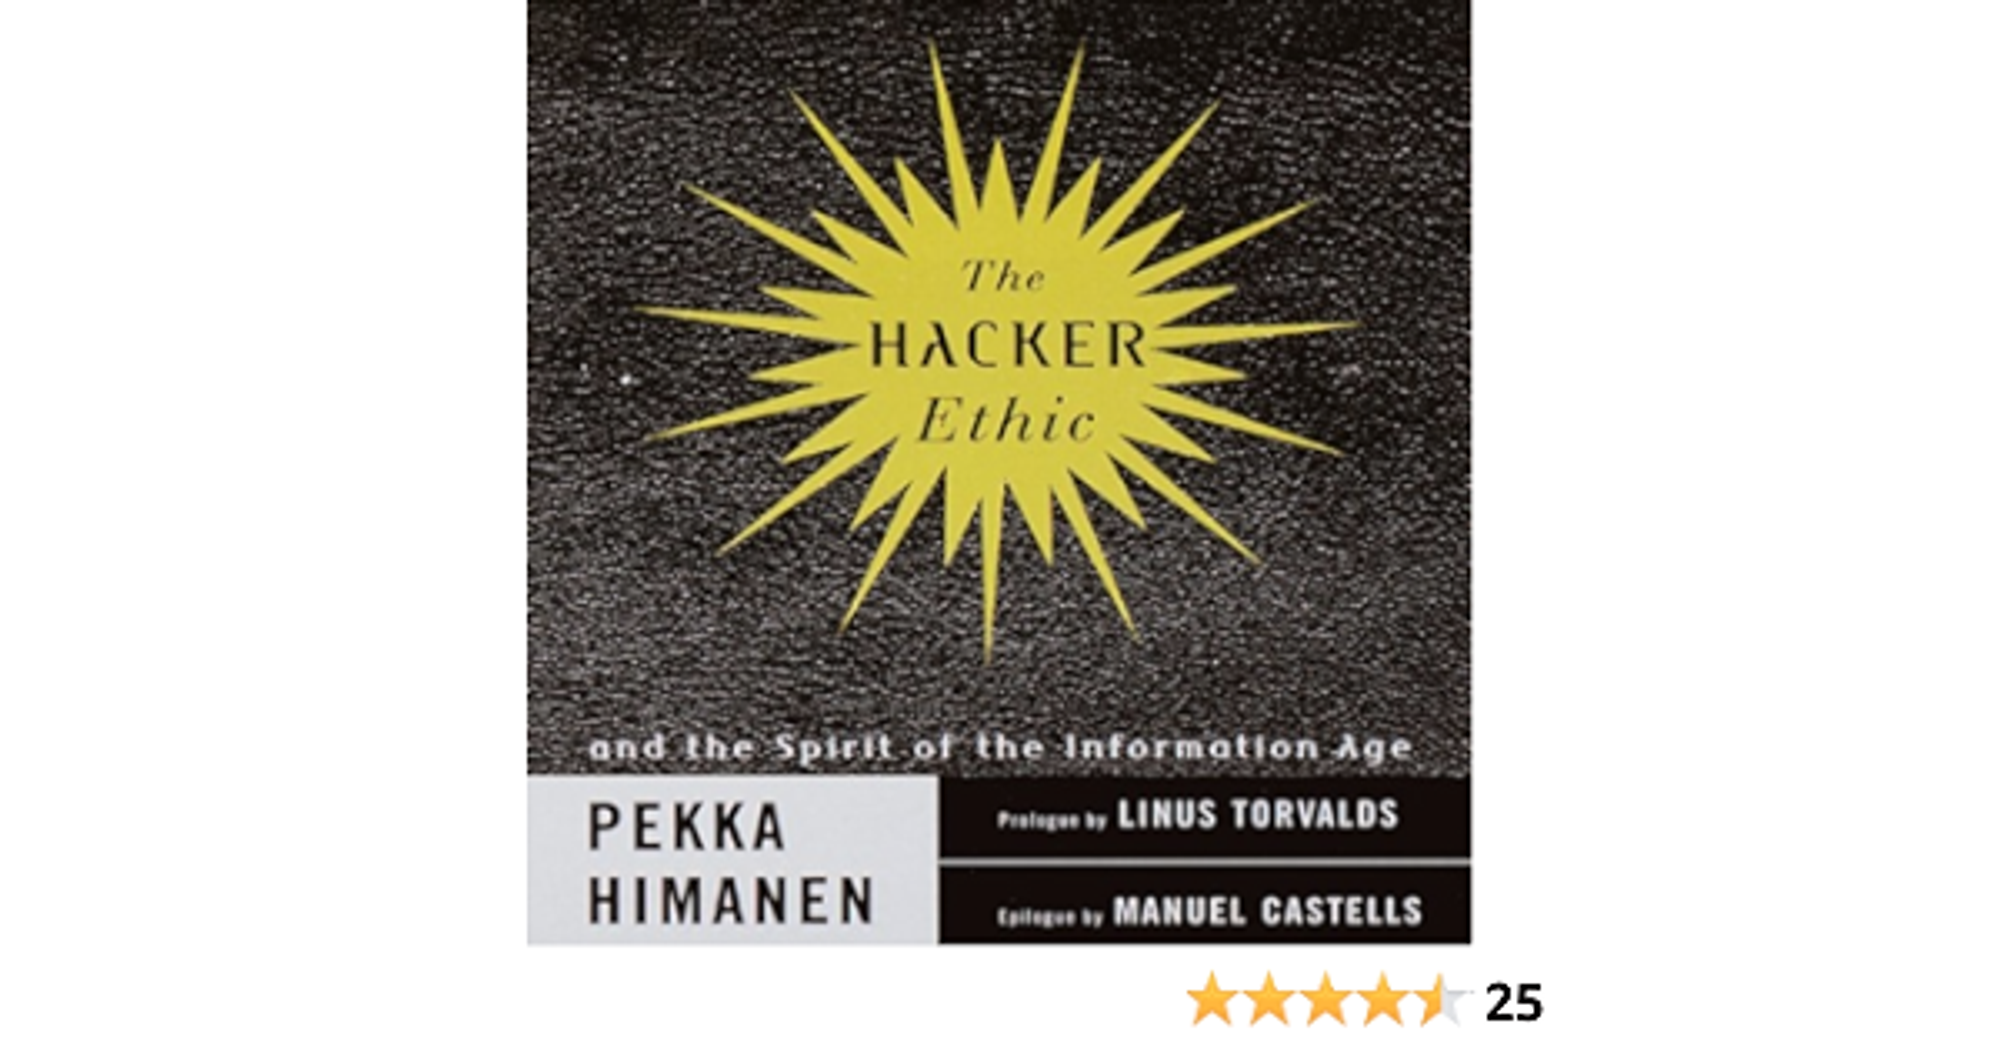 The Hacker Ethic and the Spirit of the New Economy: A Radical Approach to the Philosophy of Business